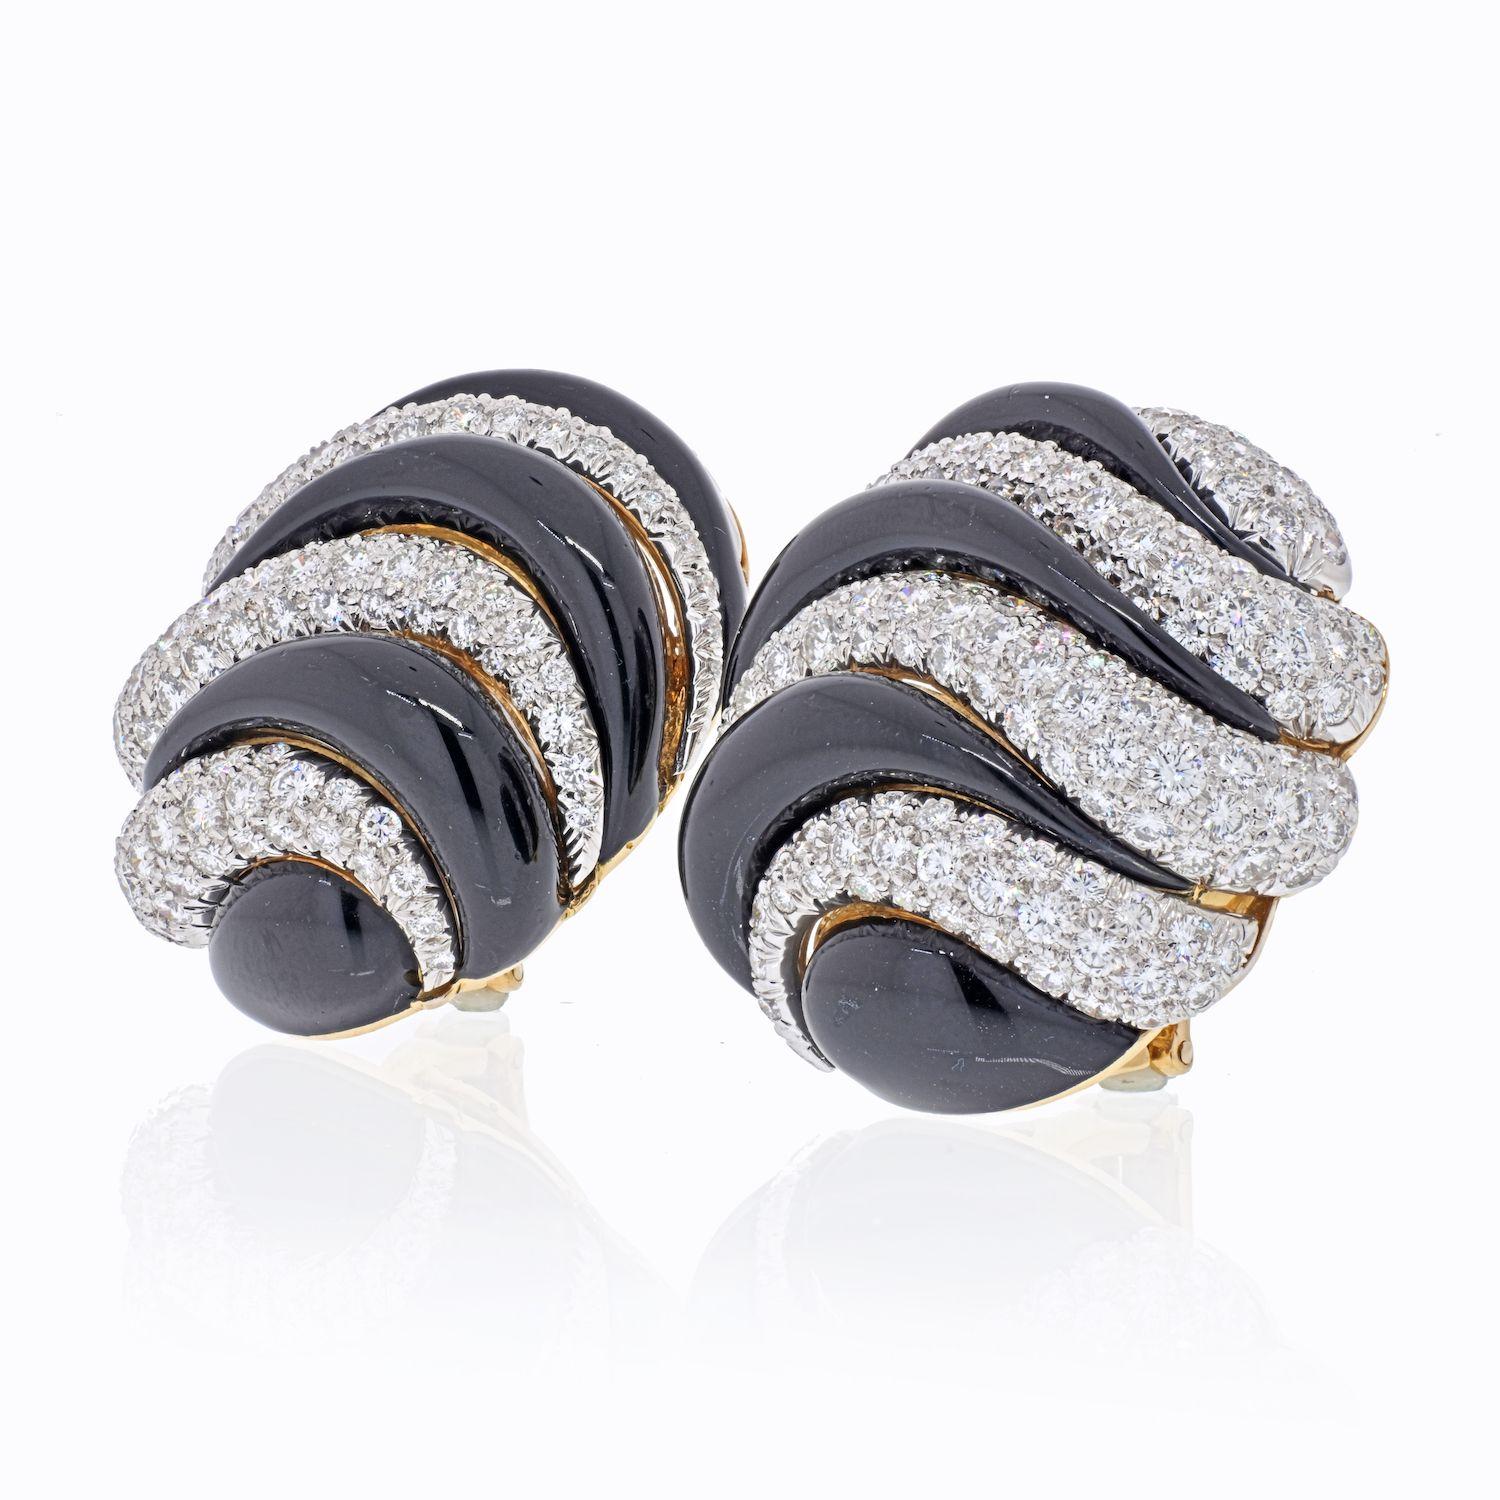 Absolutely stunning David Webb earrings crafted in 18K Yellow Gold and platinum. Impressive size and high gloss enamel along with diamond encrusted curved lines in between. 
Diamond carat weight: 9.80cttw
Quality: F-G color VVS-VS clarity 
Clip On